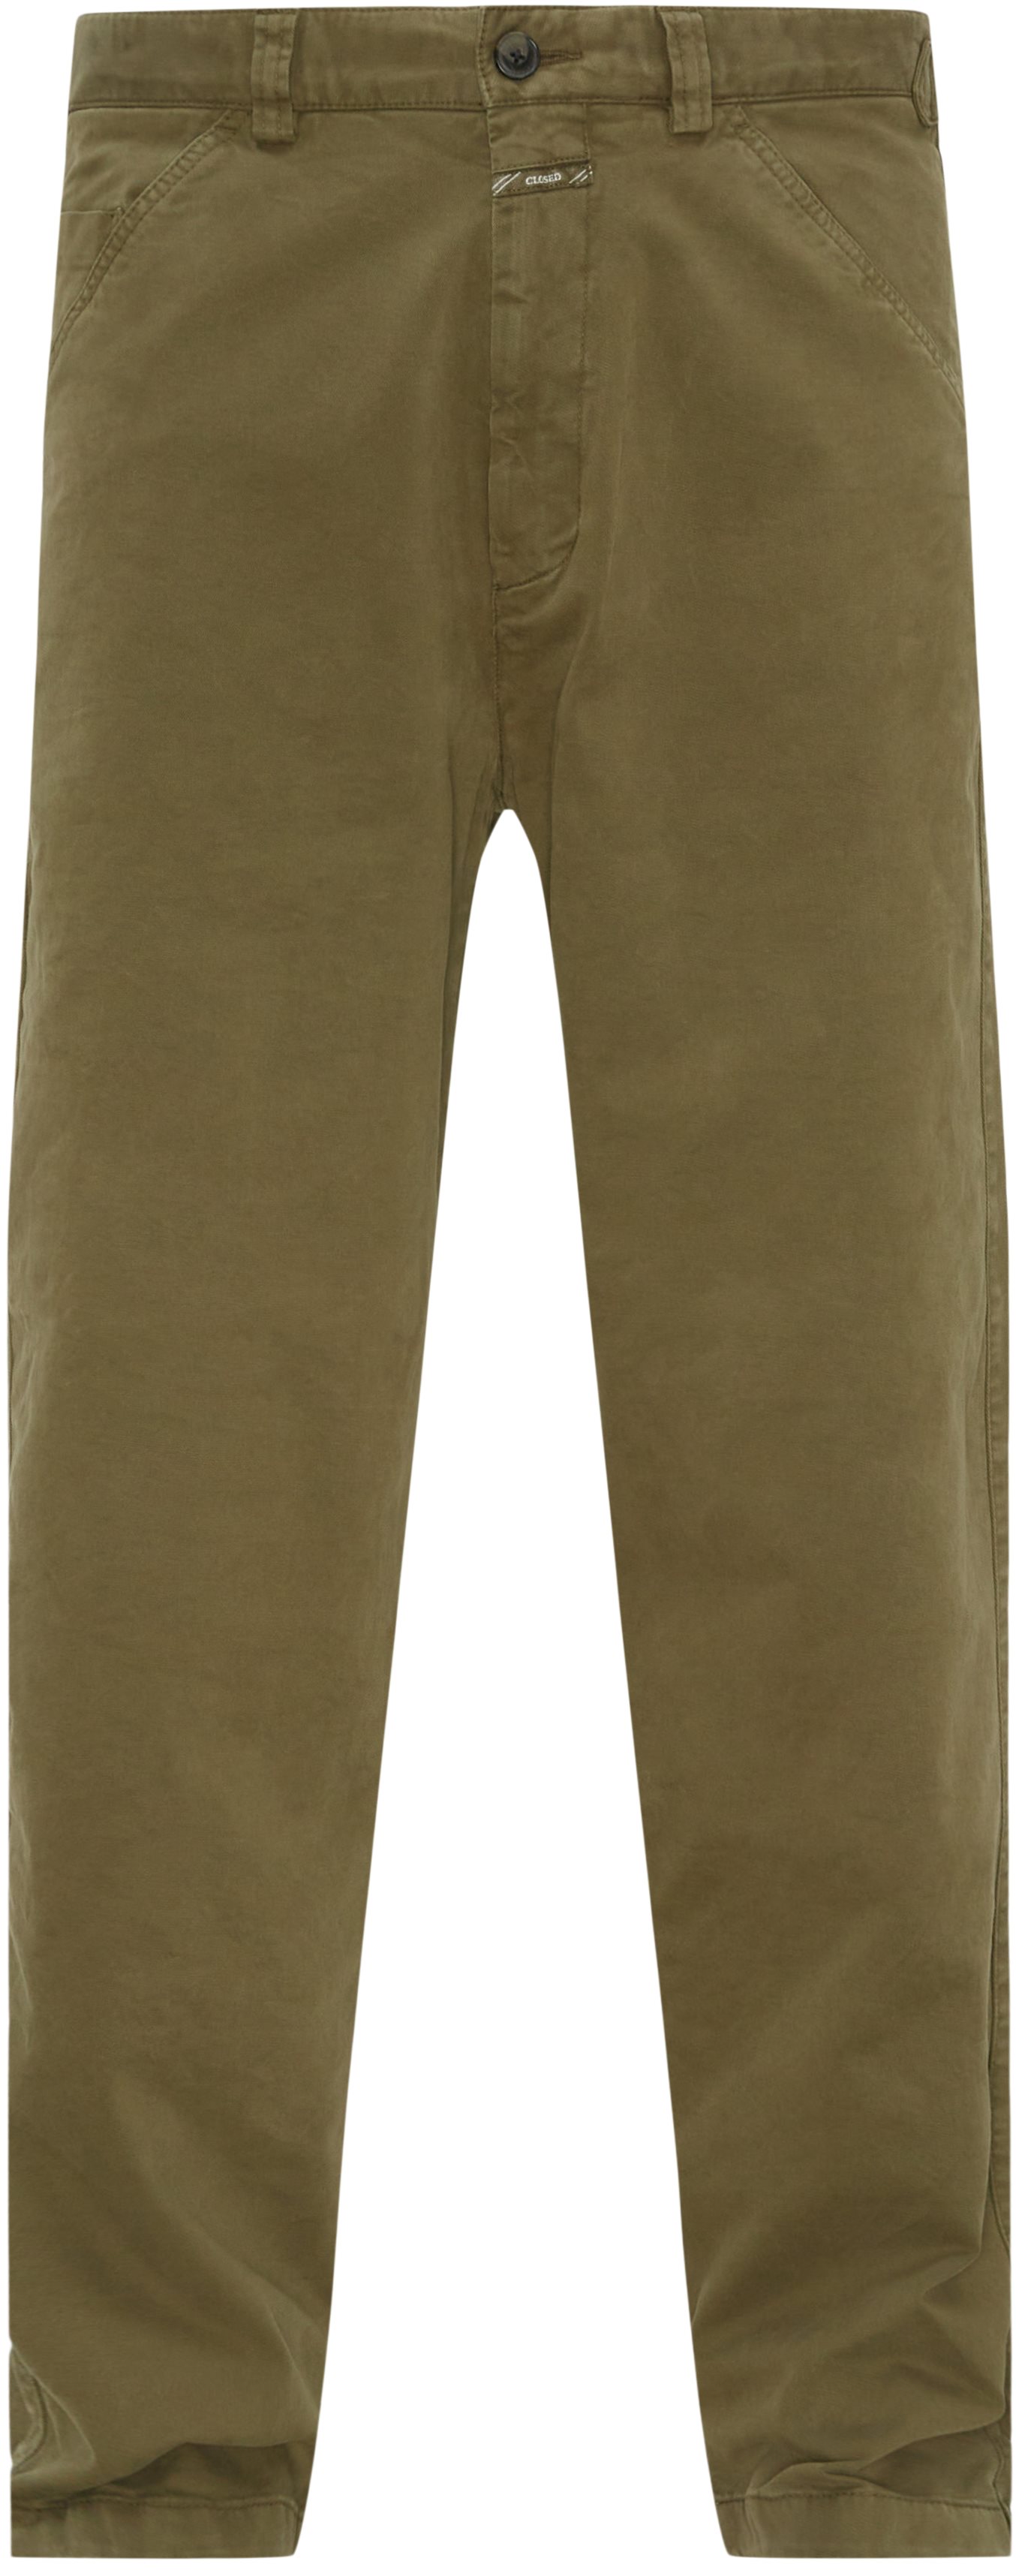 Closed Trousers C32214-301-30 DOVER TAPERED Green